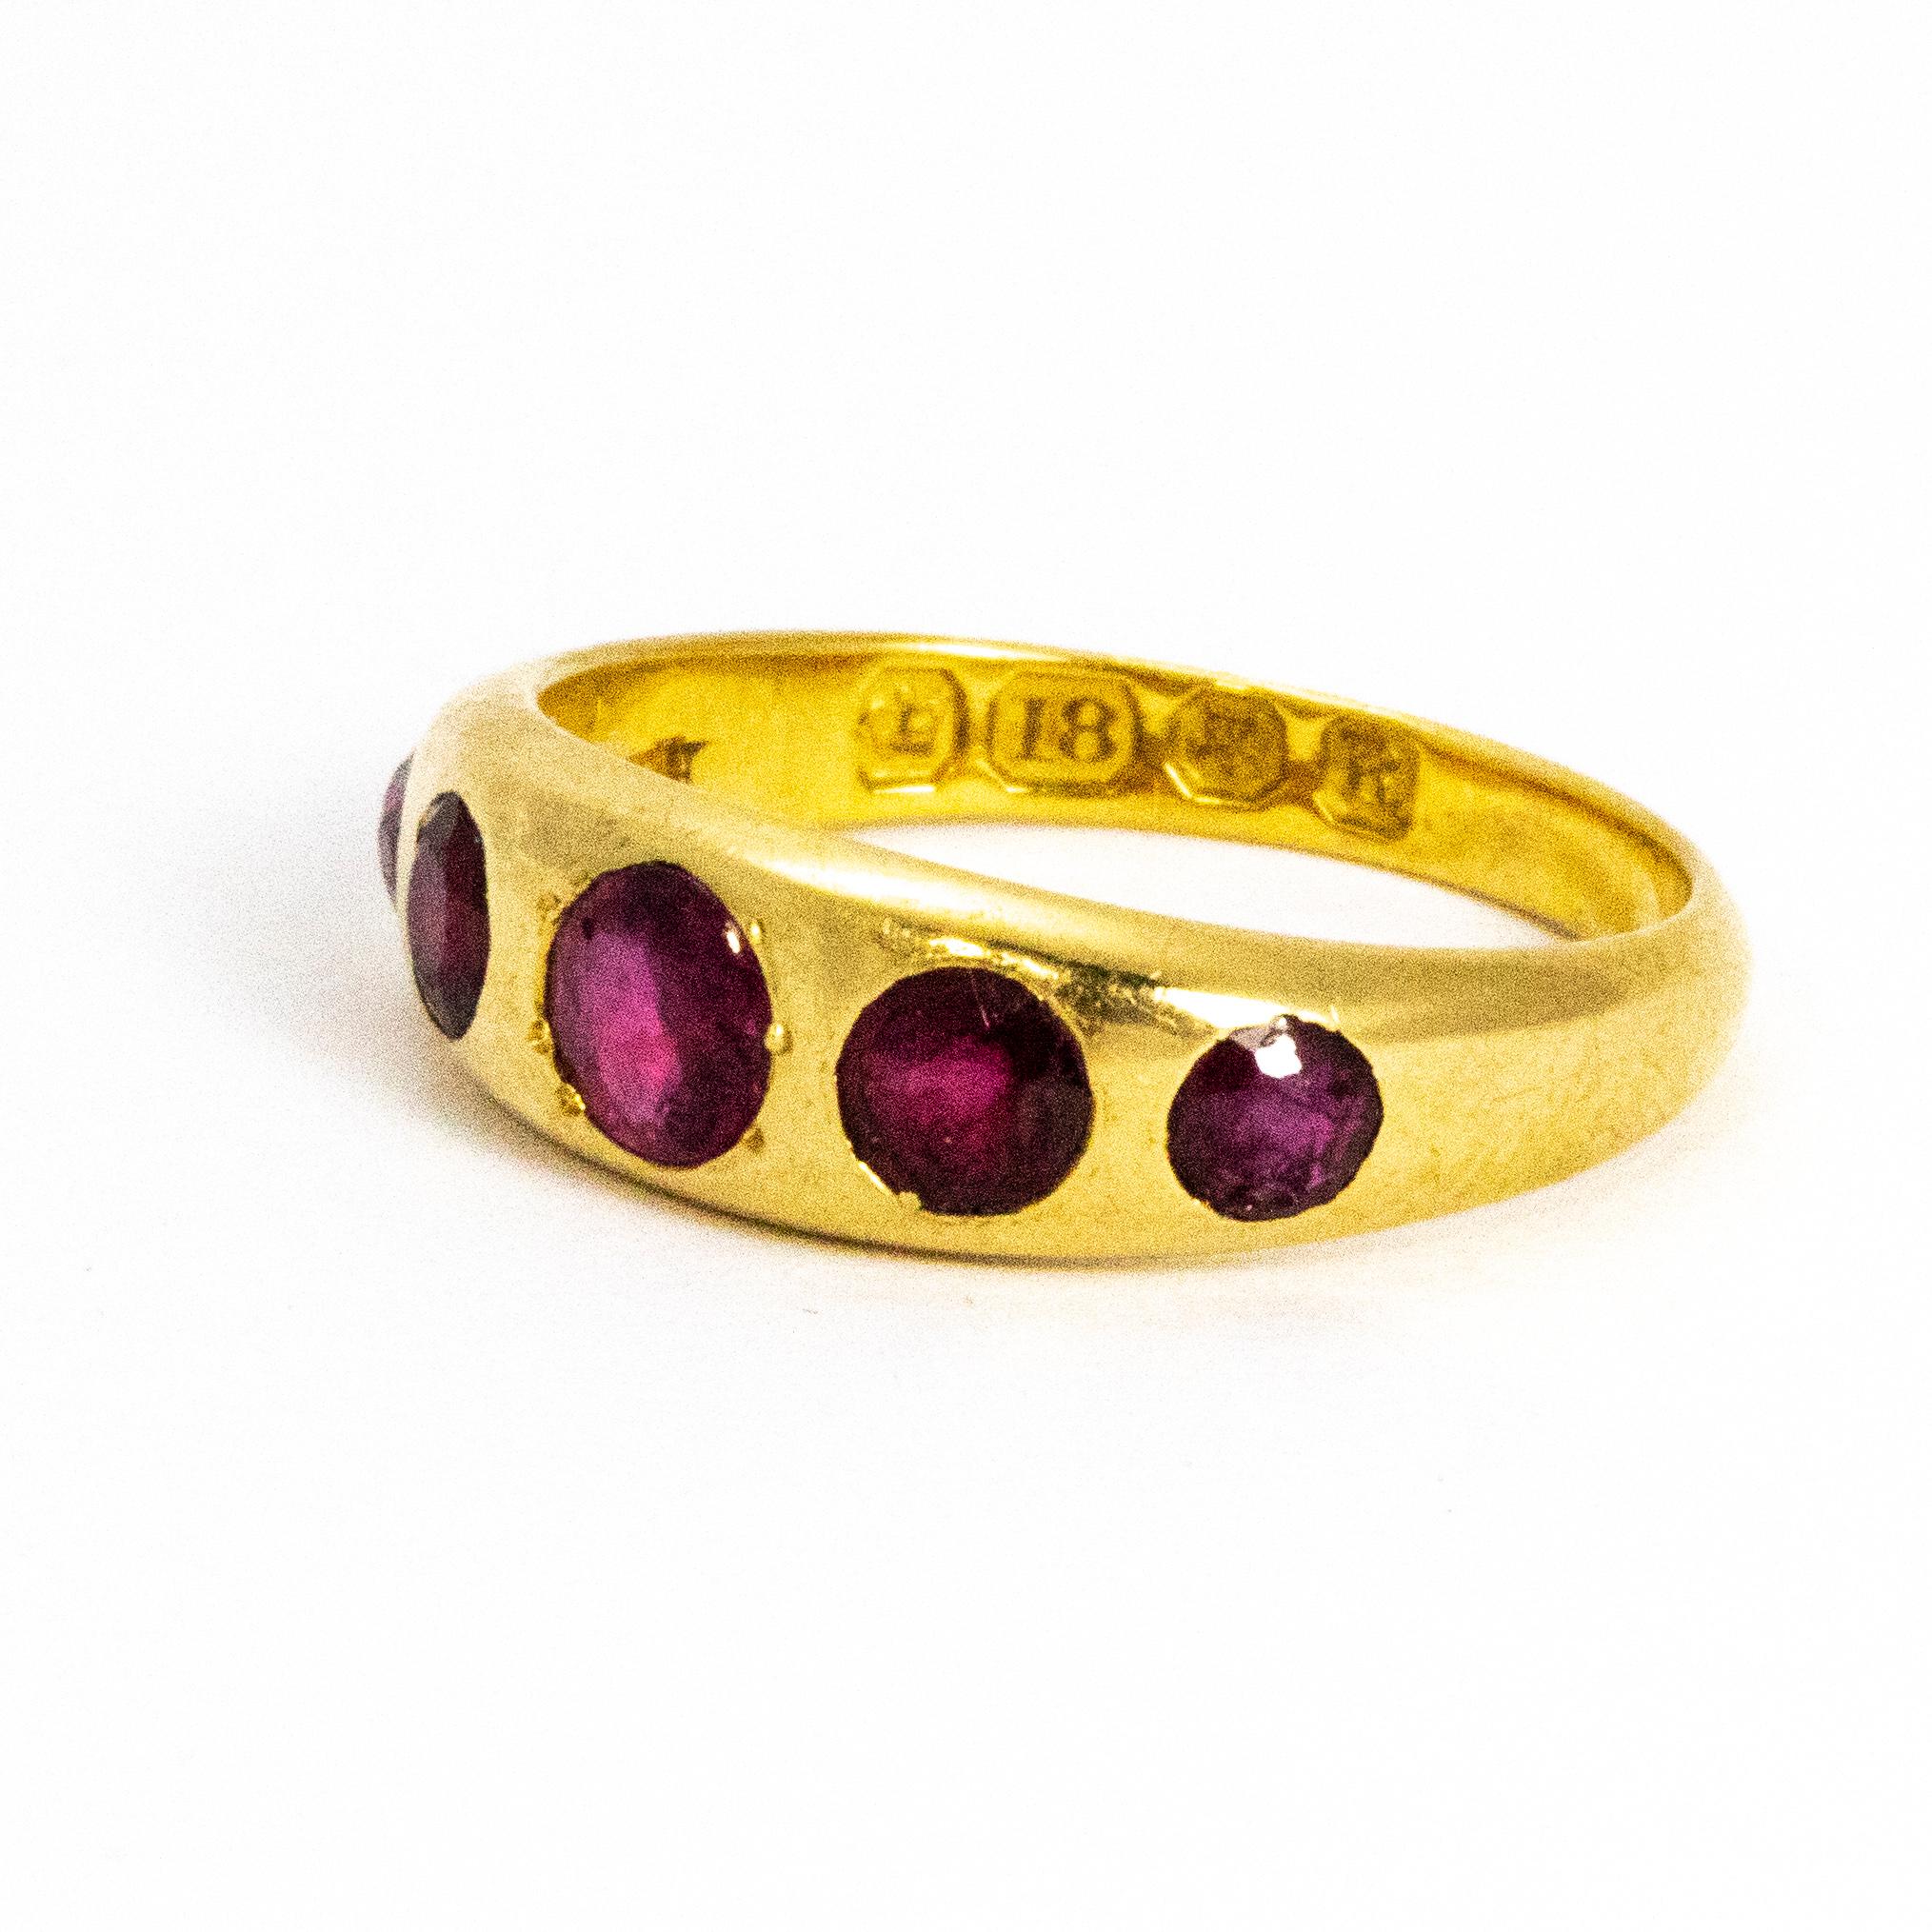 Five graduated sparkling rubies are held in this chunky 18ct gold band. The beautiful rubies are set flush in the band so the ring is very stream lined and smooth. Made in London, England.

Ring Size: K 1/2 or 5 1/2
Band Width: 4mm